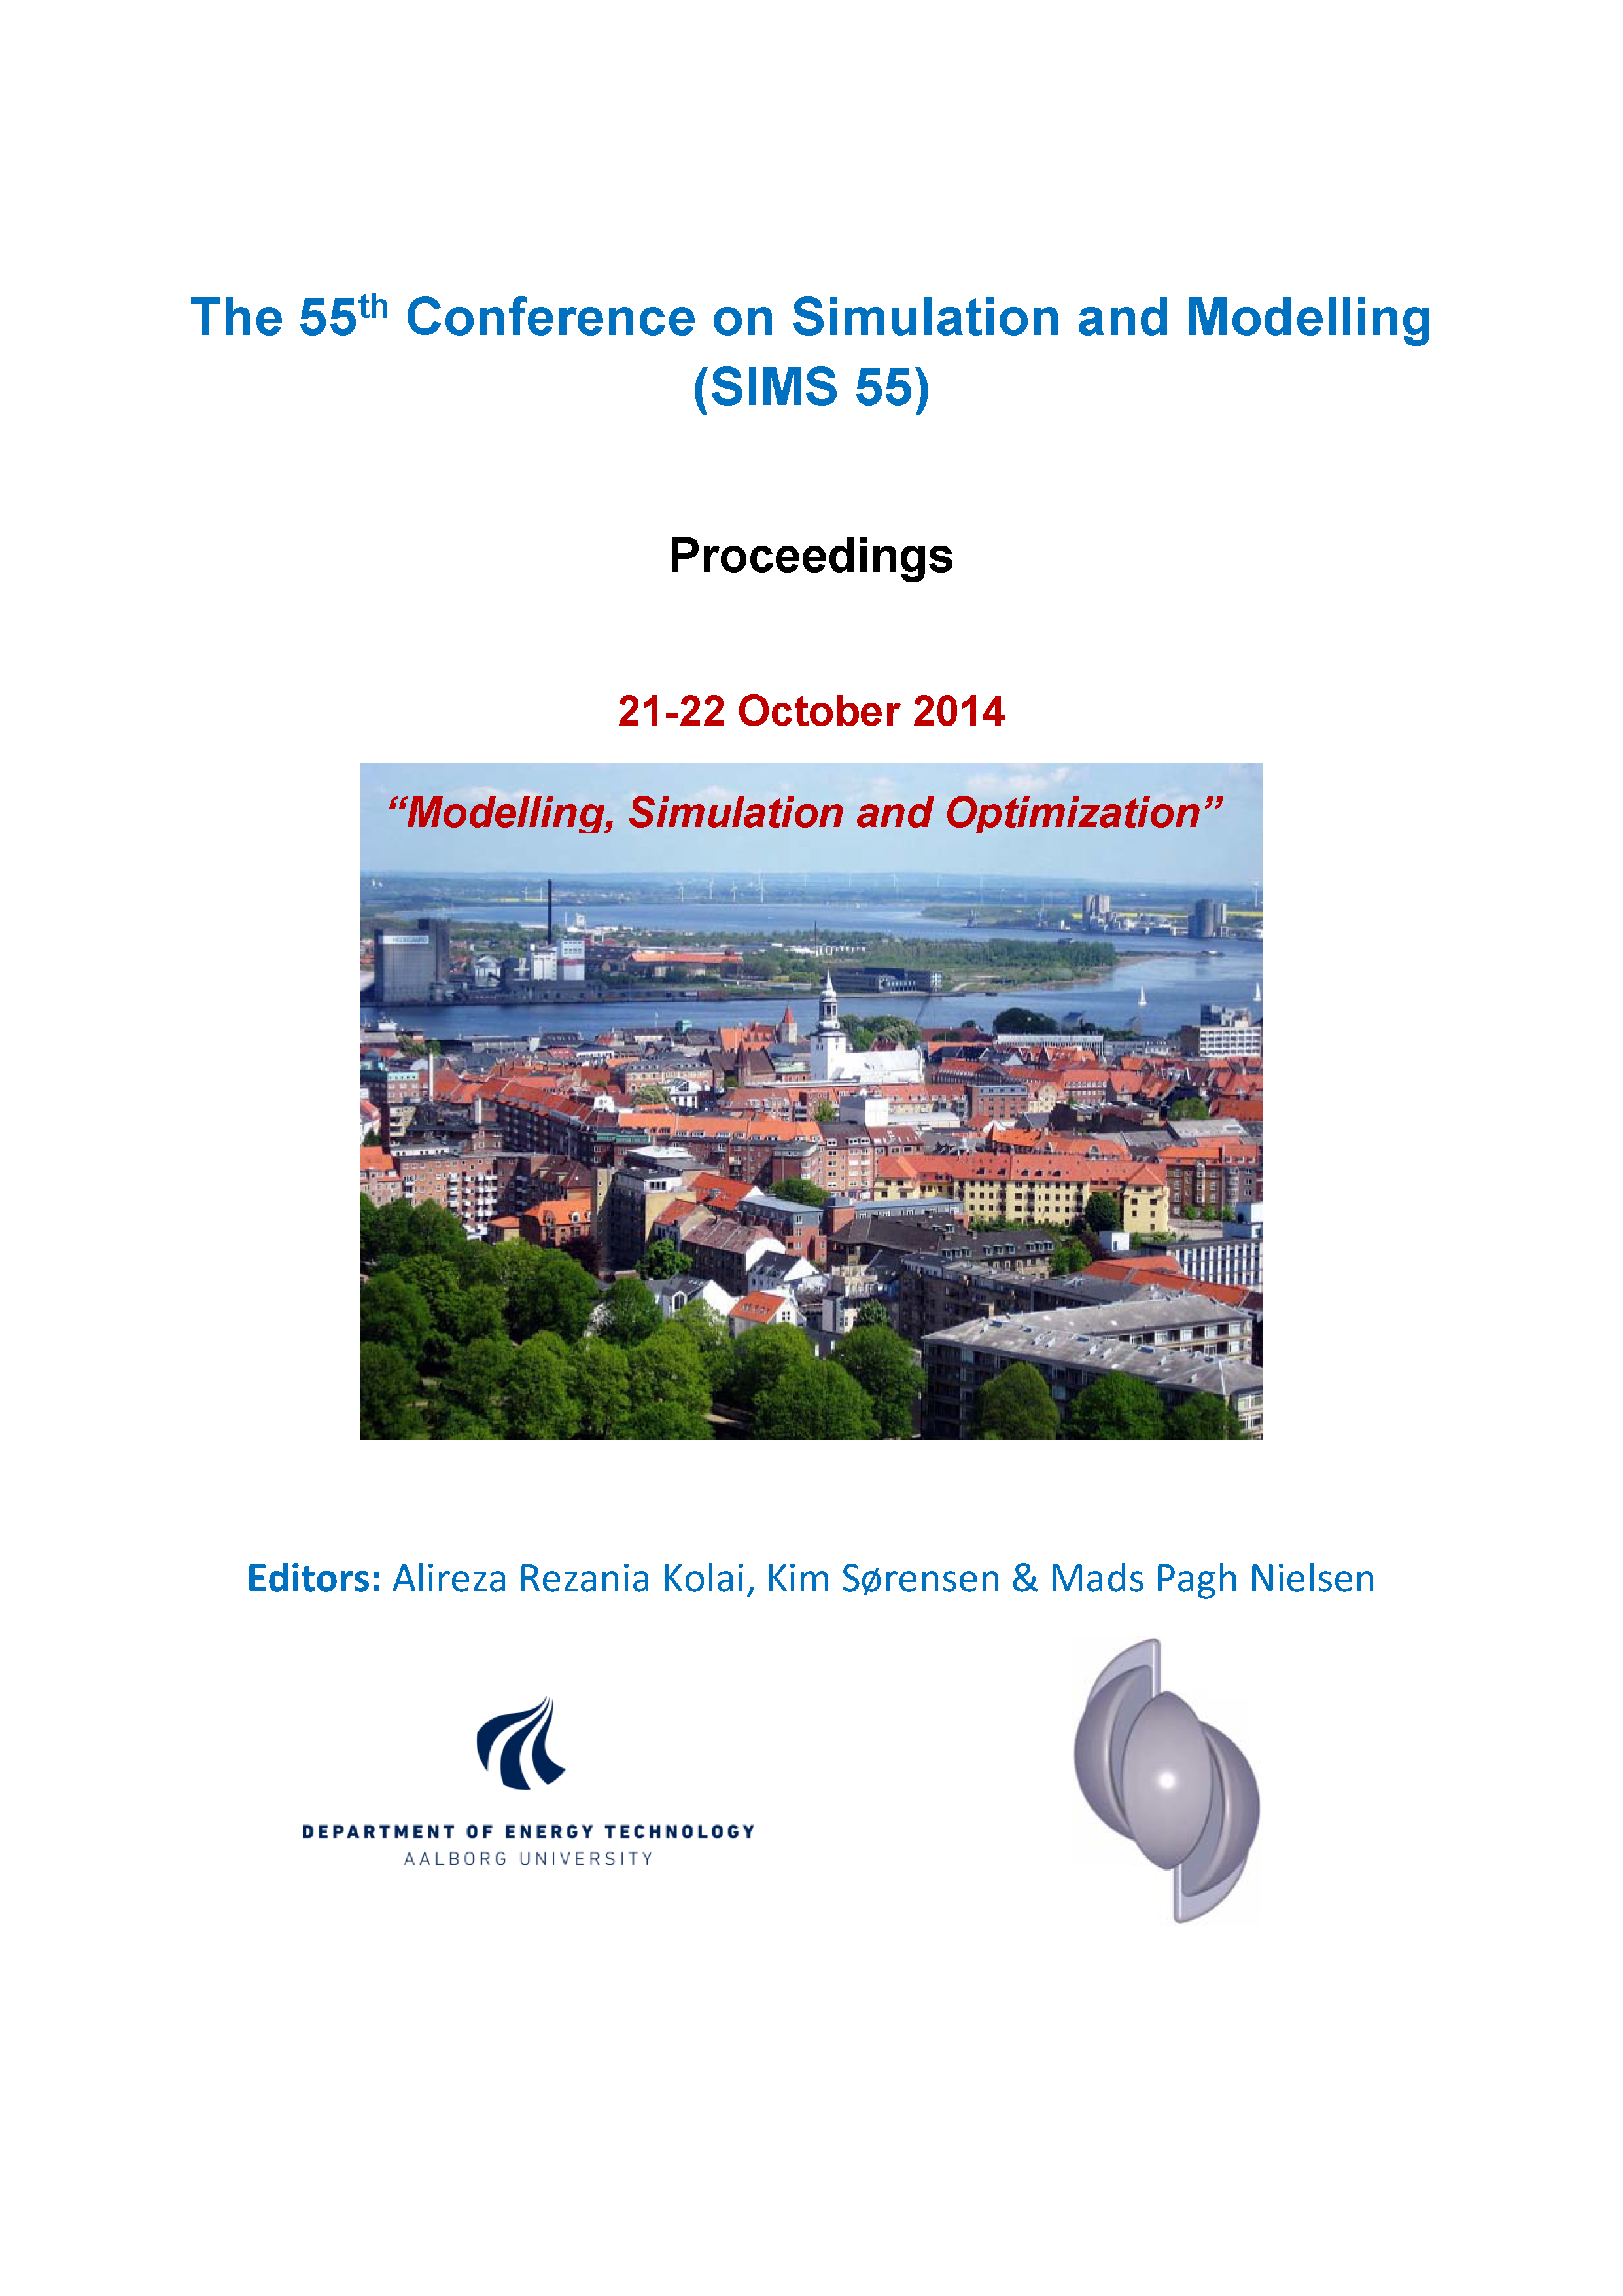 					View Proceedings of the 55th Conference on Simulation and Modelling (SIMS 55), Modelling, Simulation and Optimization, 21-22 October 2014, Aalborg, Denmark
				